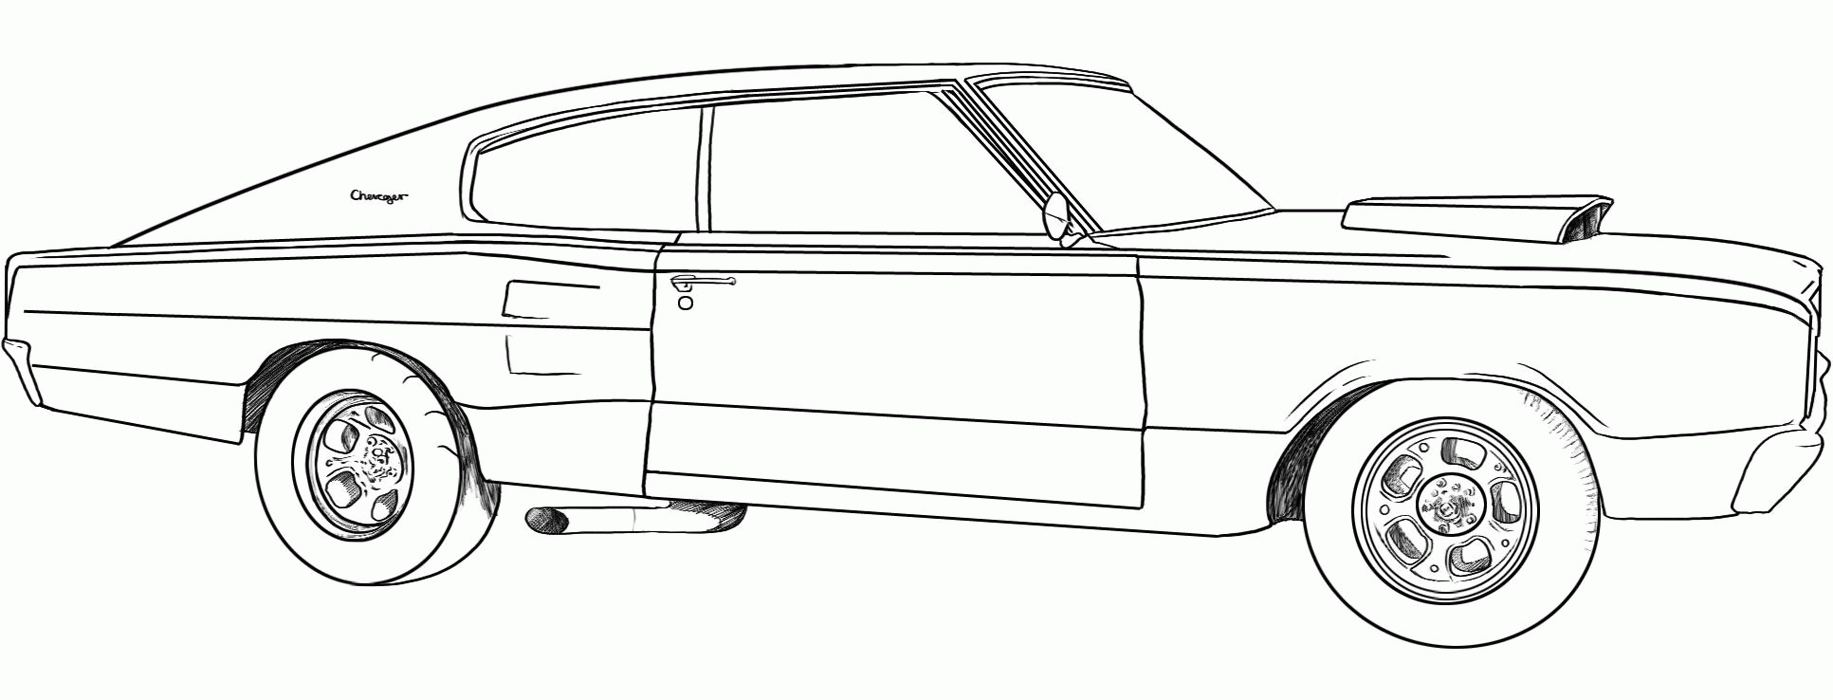 camaro coloring page | High Quality Coloring Pages